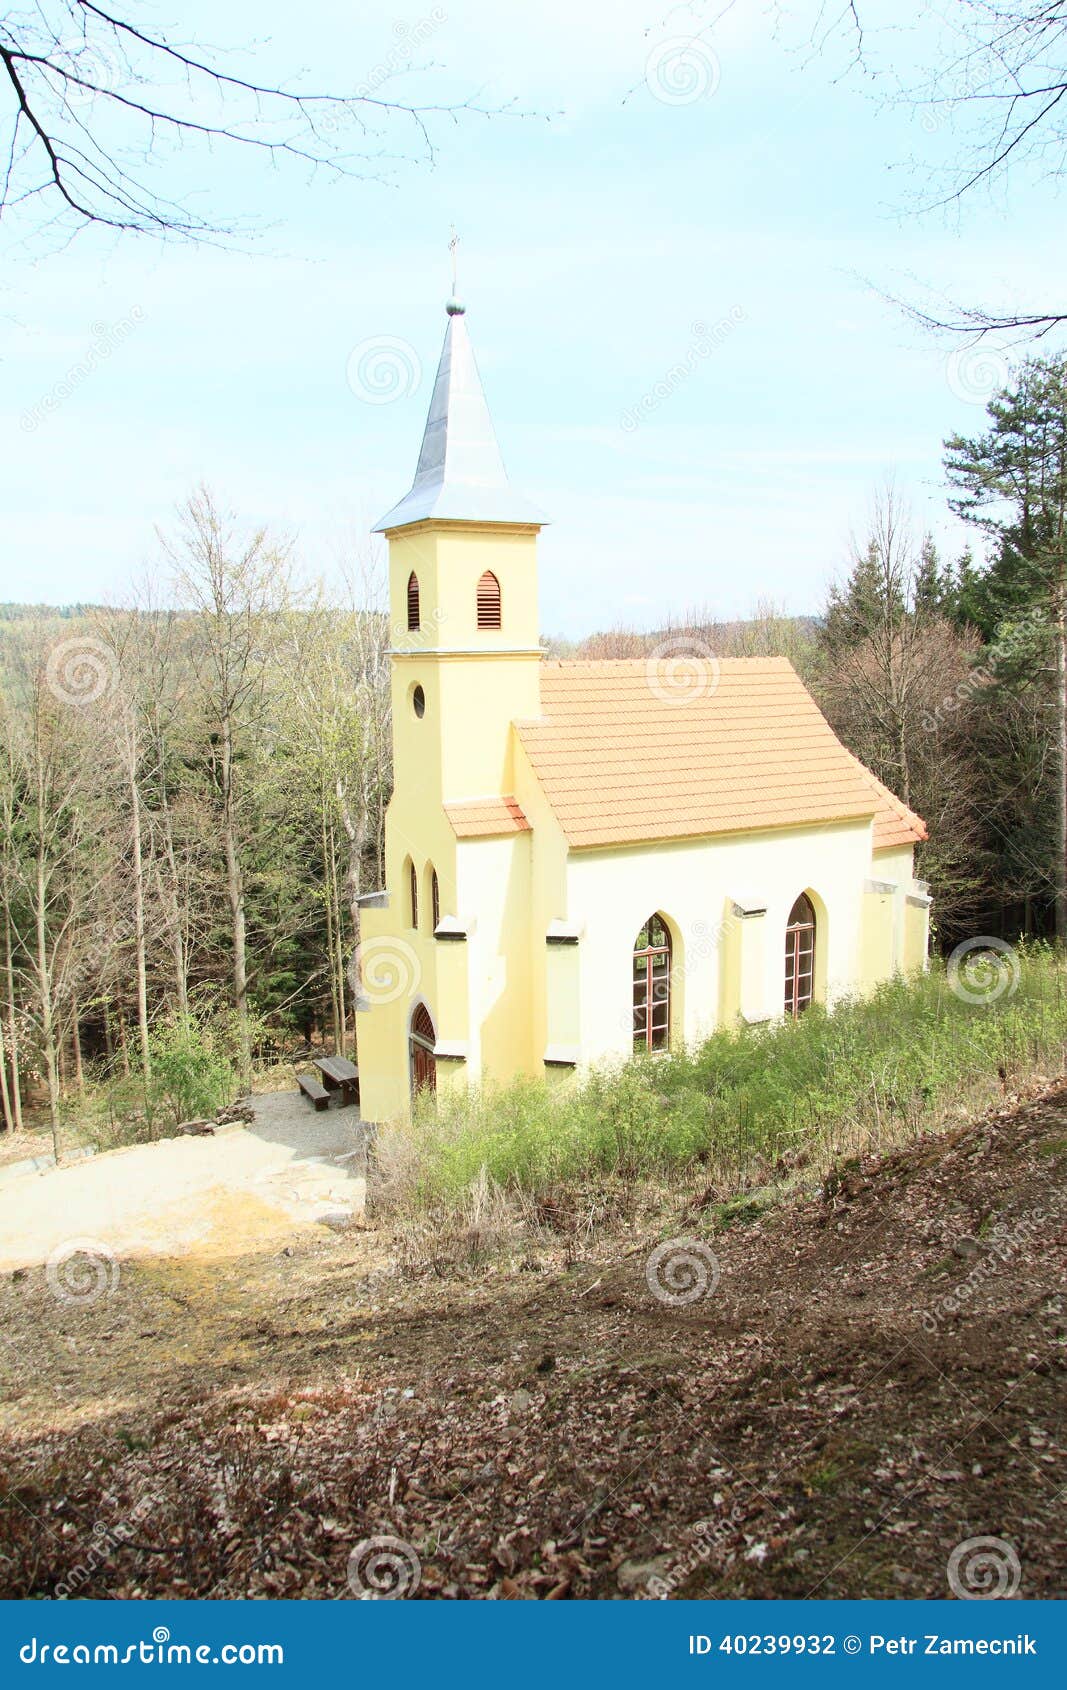 renewed church in forest